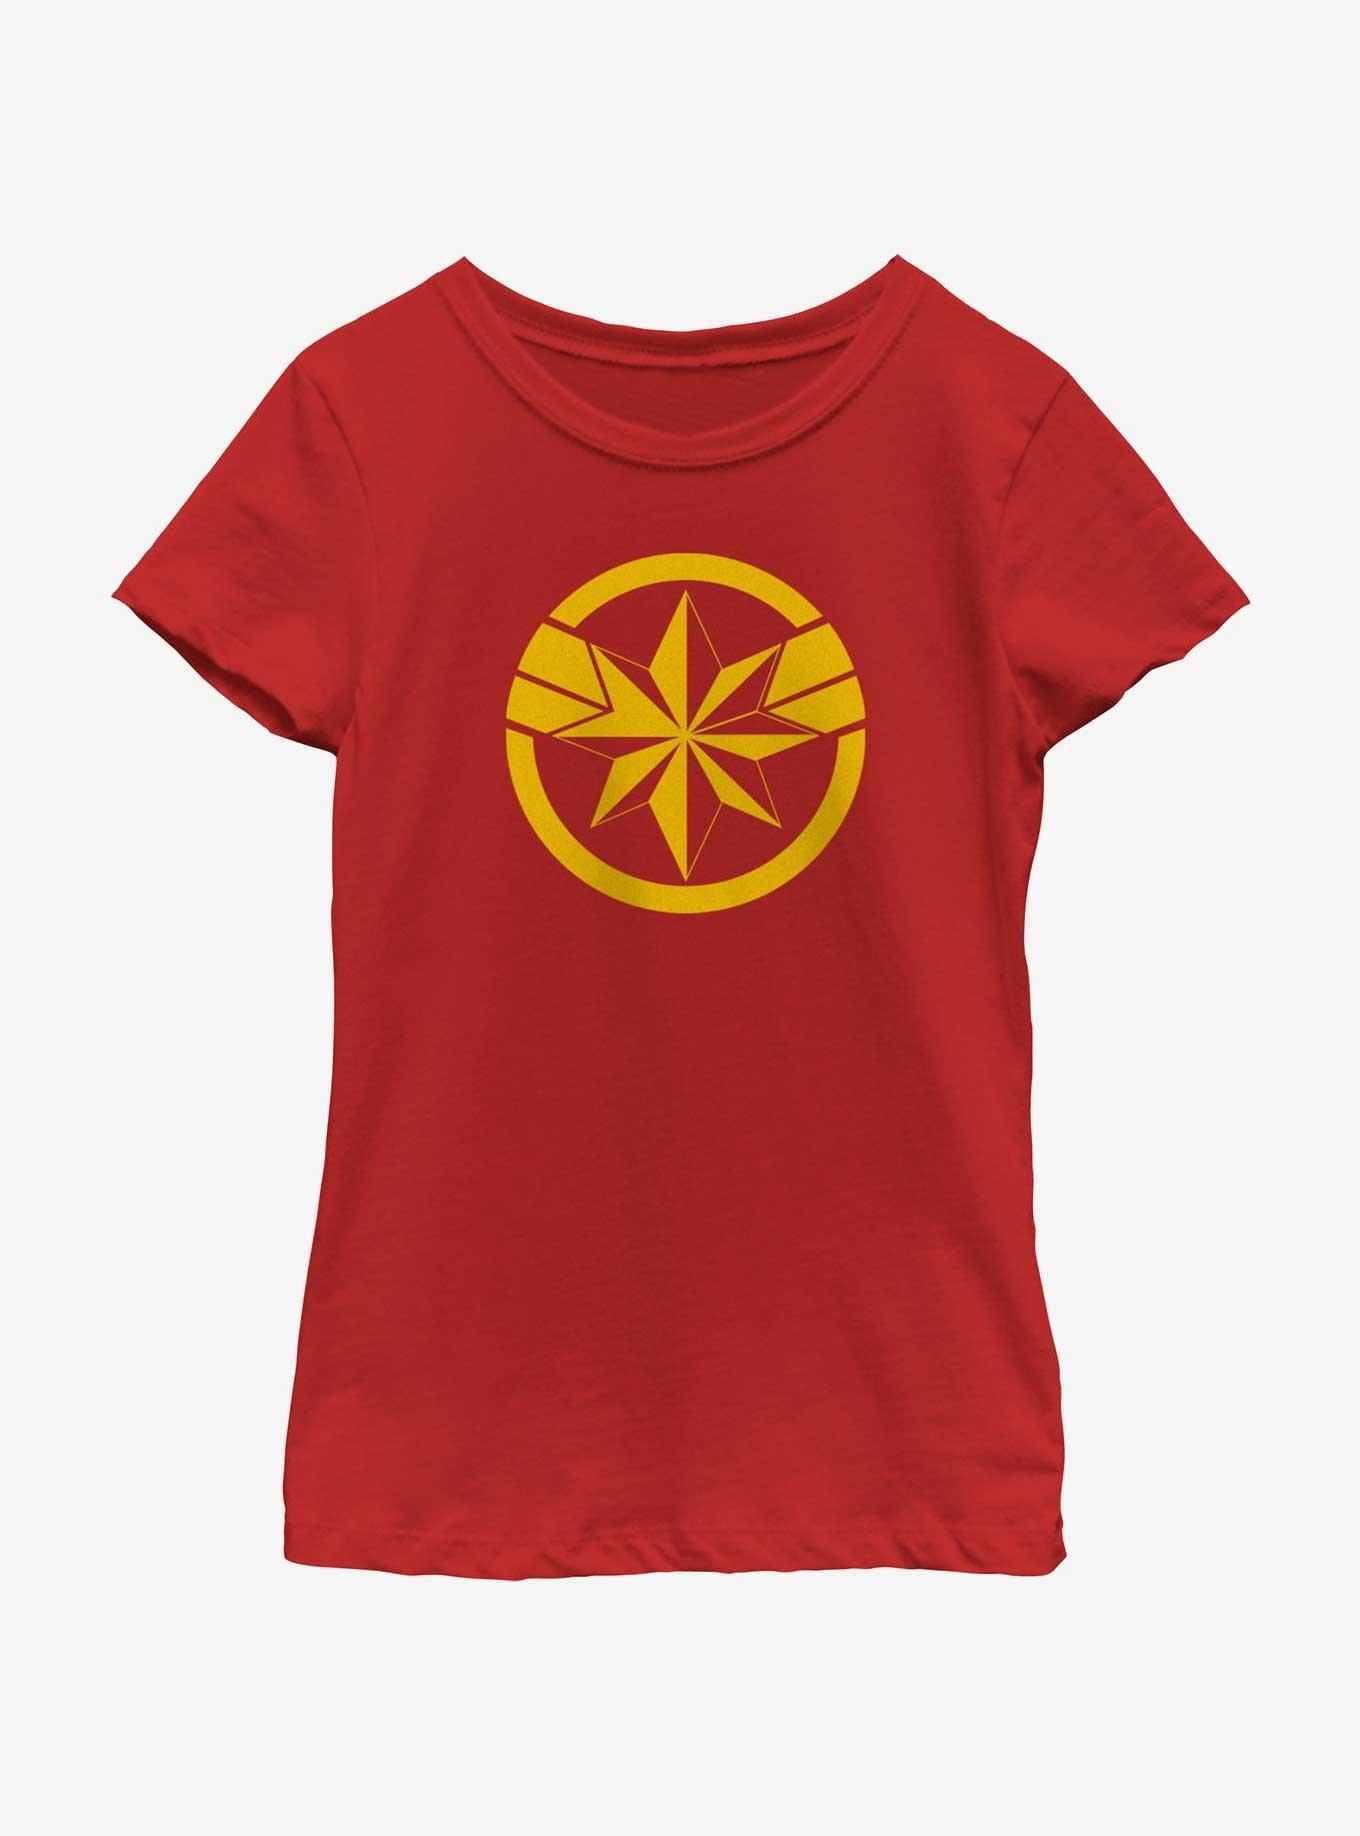 Marvel The Marvels Captain Marvel Insignia Youth Girls T-Shirt, RED, hi-res